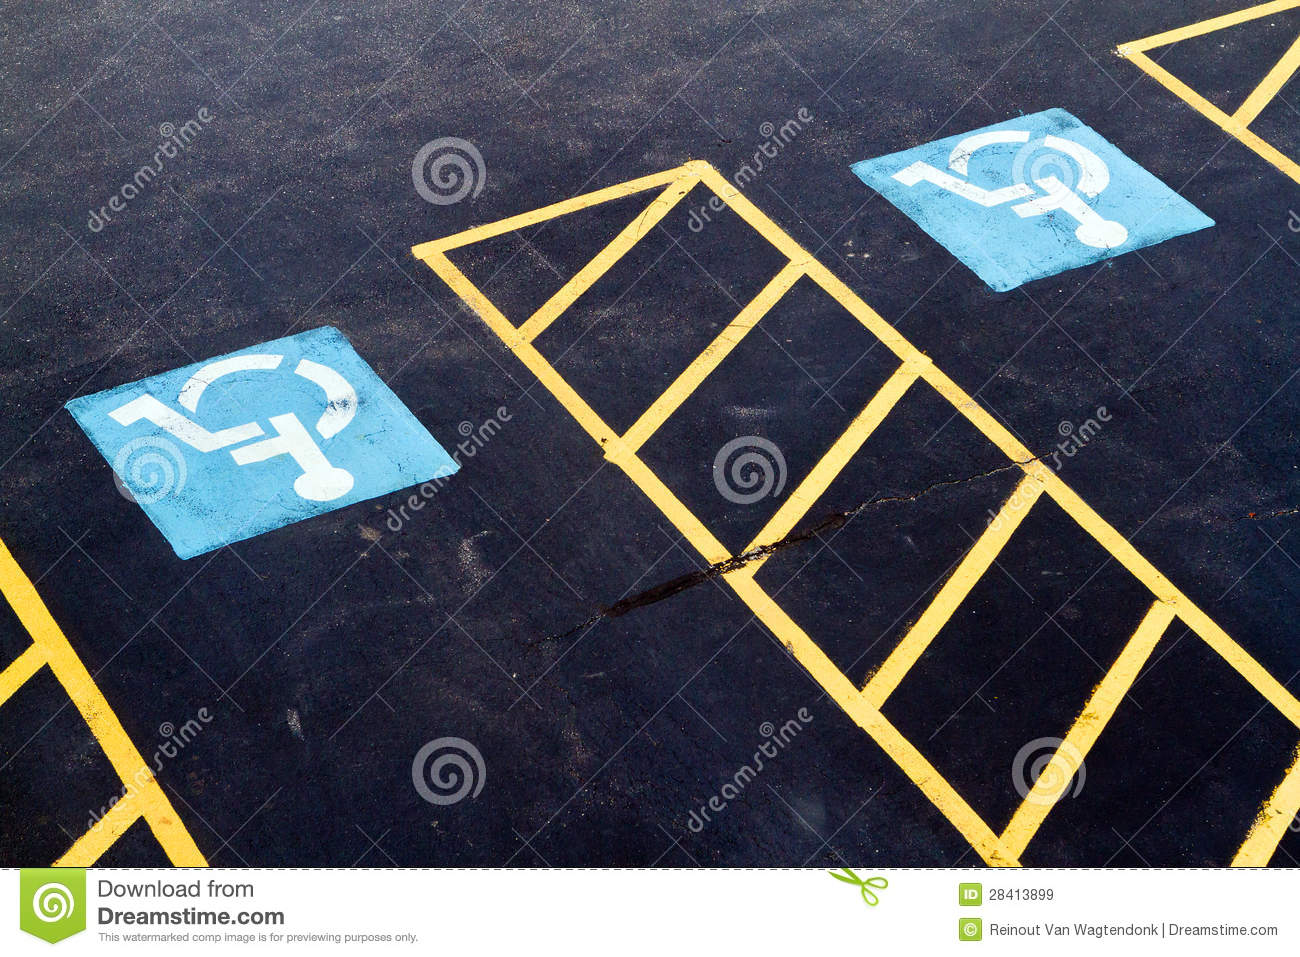 Two Handicapped Parking Spots Royalty Free Stock Images   Image